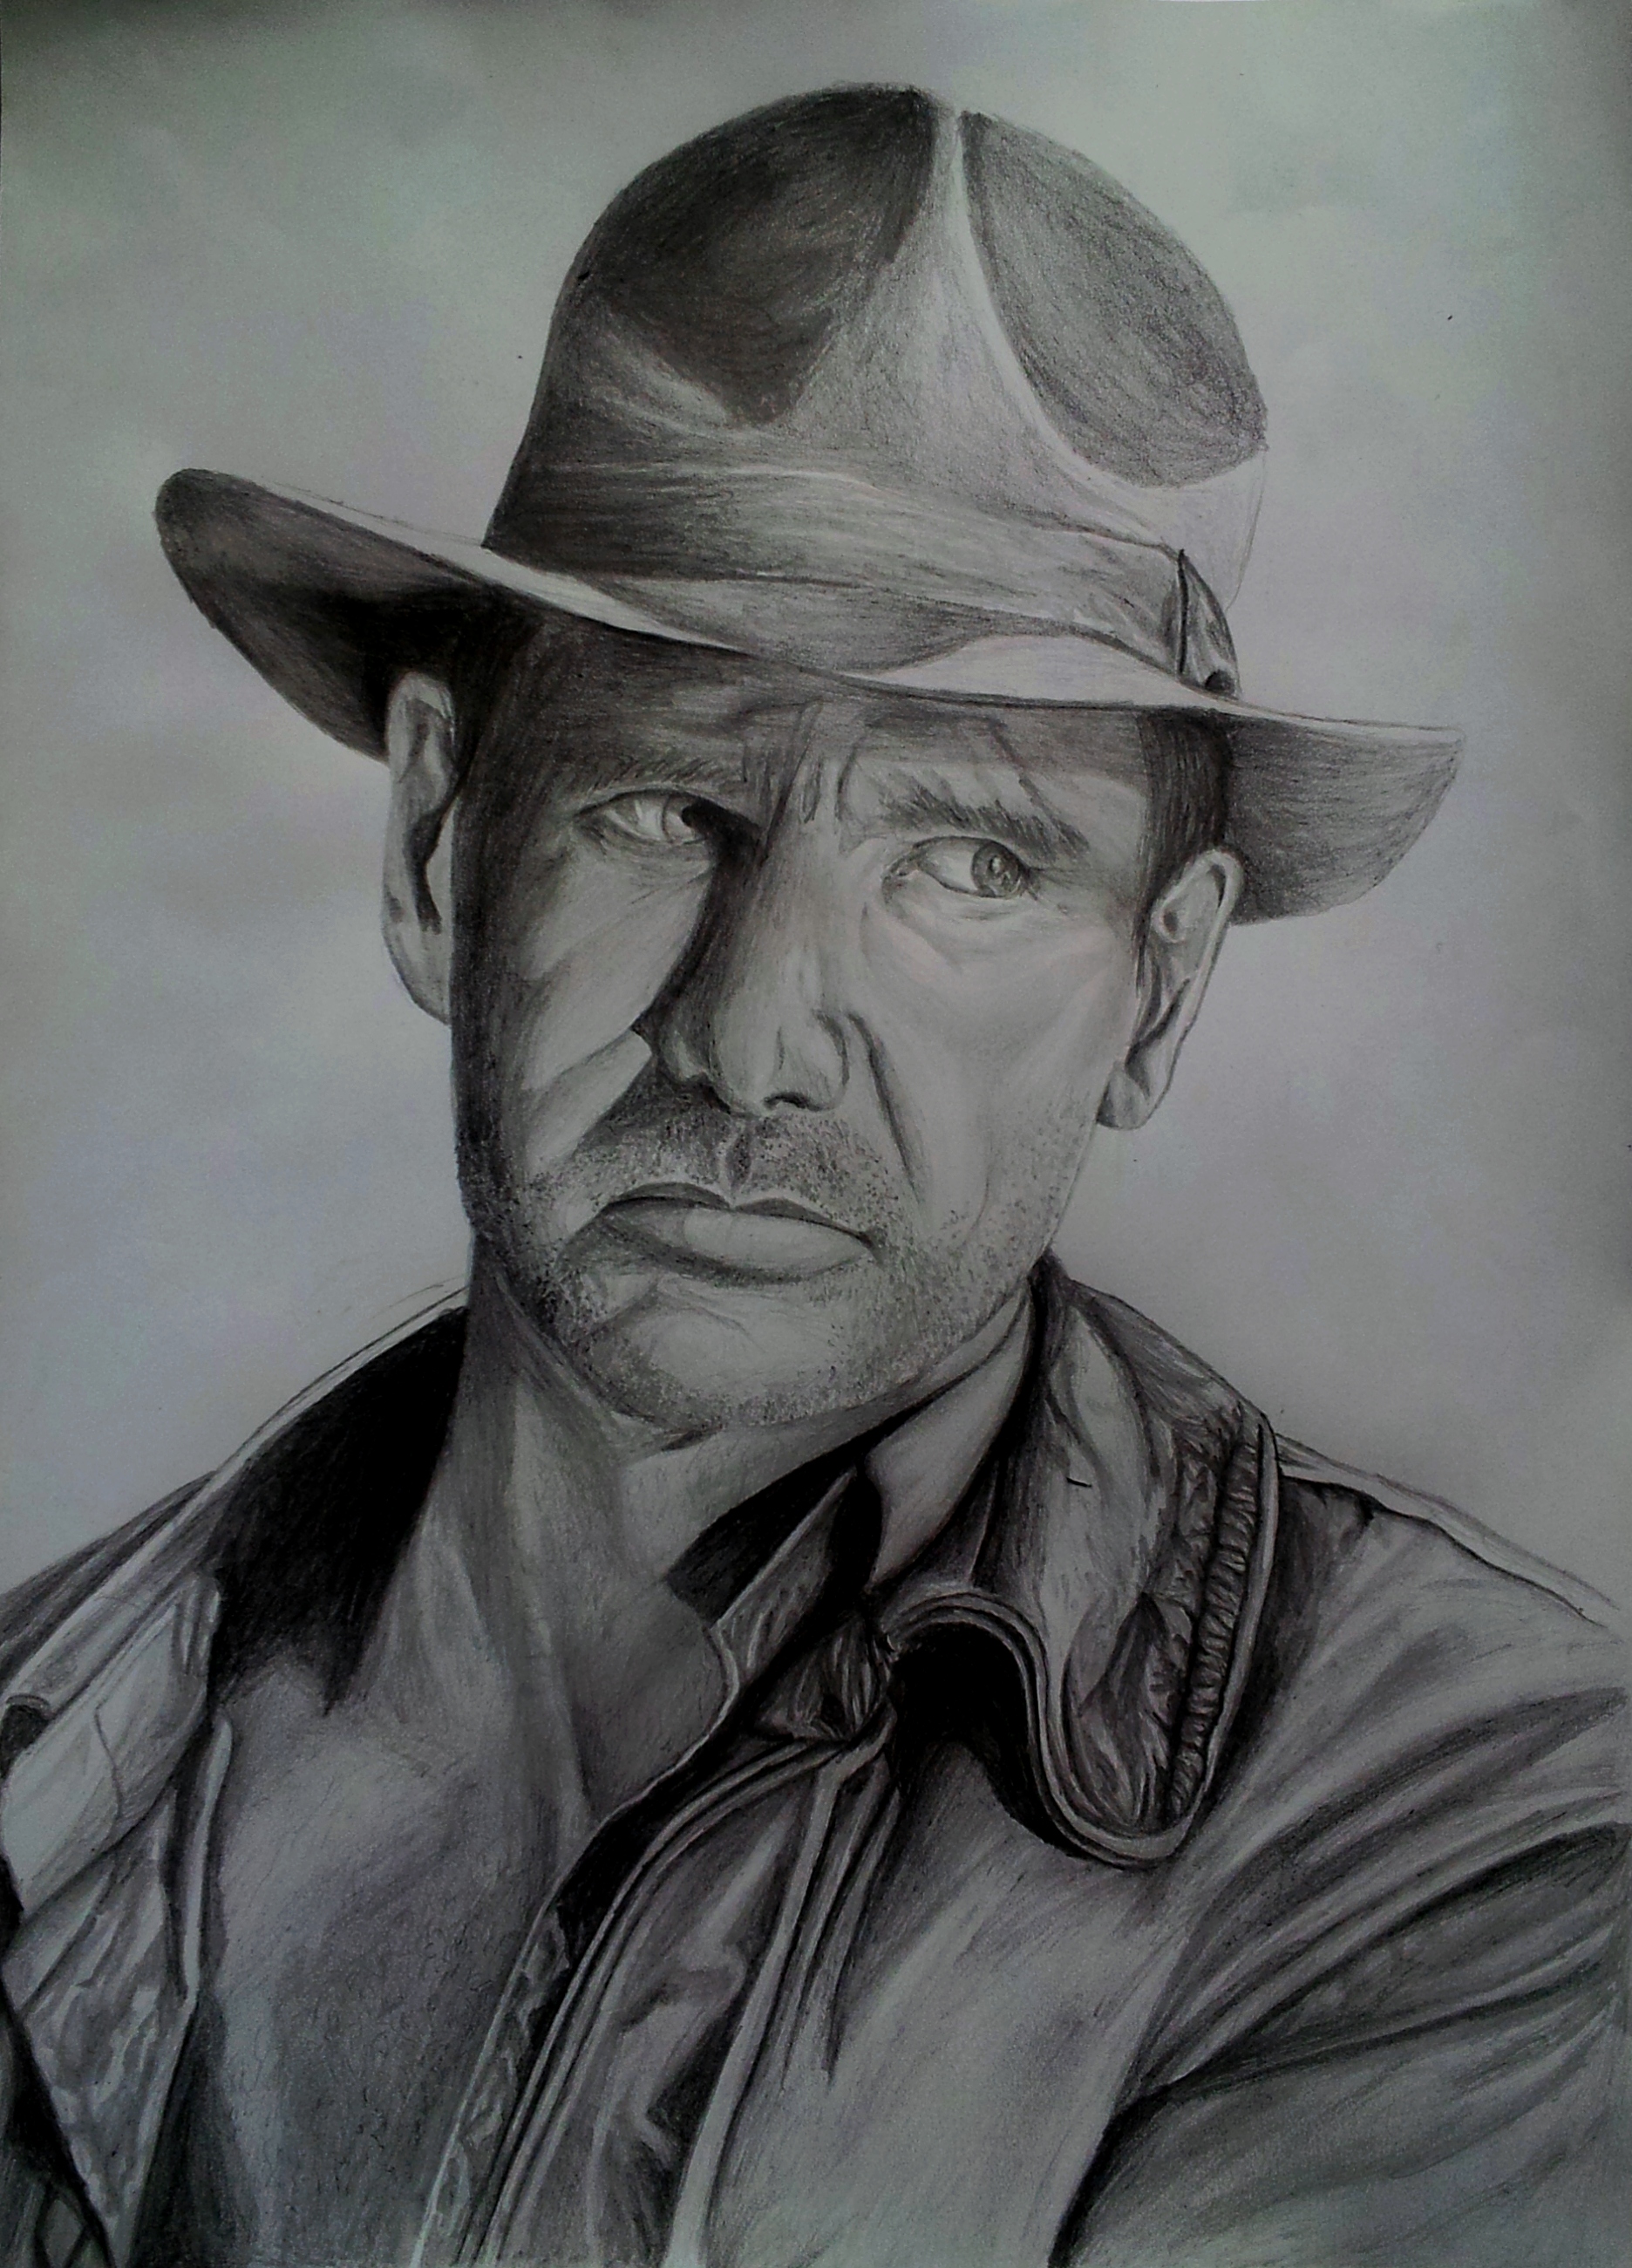 Harrison Ford Indiana Jones drawing by request image - Art lovers group